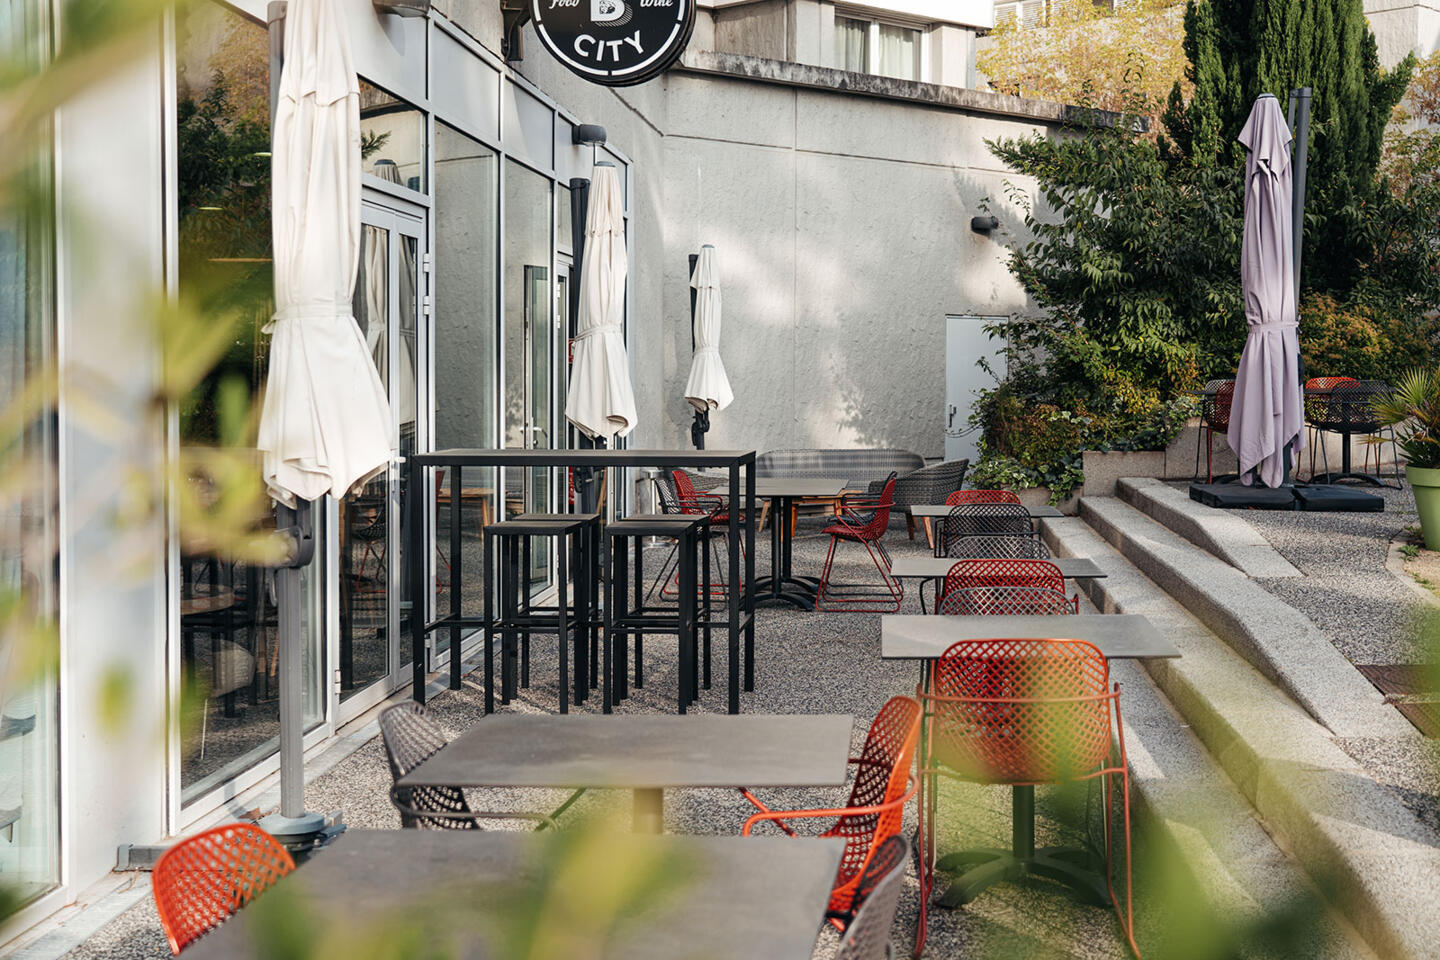 Serene terrace of Bistrot City restaurant in Lyon Cité Internationale, featuring modern black metal tables and chairs with orange seats, closed umbrellas, set within an urban greenery-filled environment, creating a relaxing atmosphere.